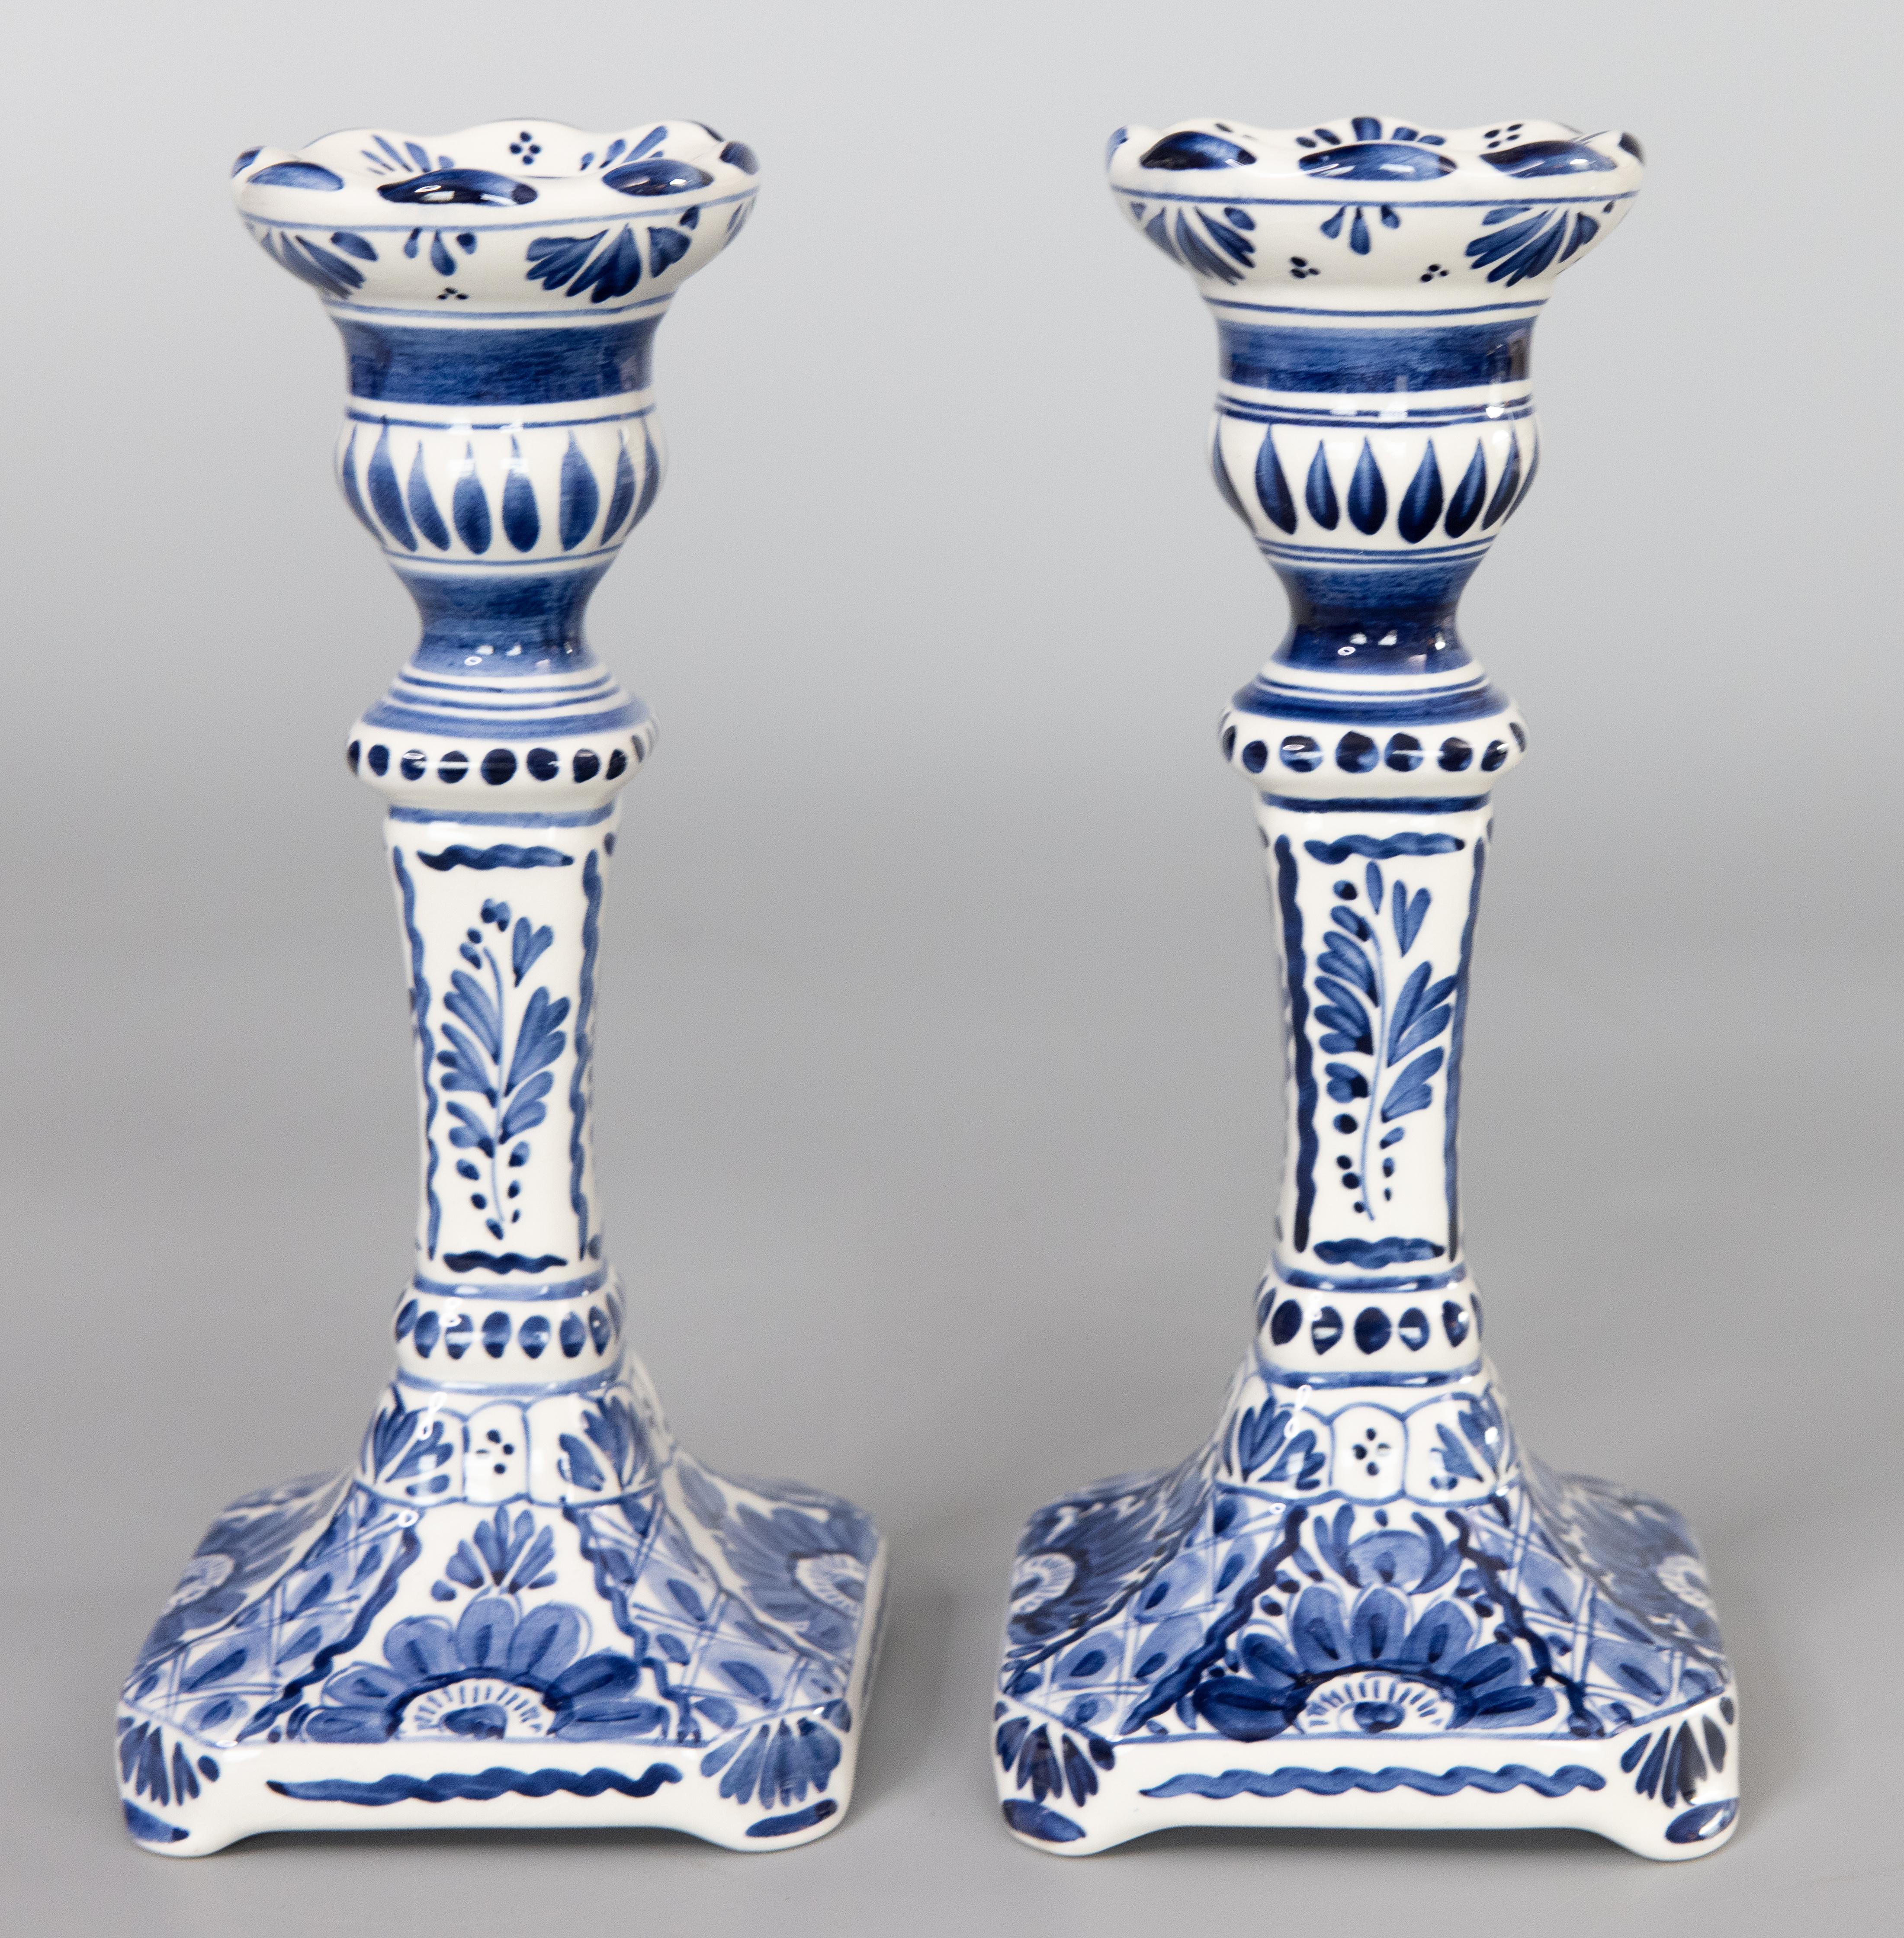 A lovely pair of Mid-Century Dutch Delft faience candlesticks. These fine candlesticks are hand painted with a floral design in the traditional Delft colors of cobalt blue and white.

Dimensions
3.5